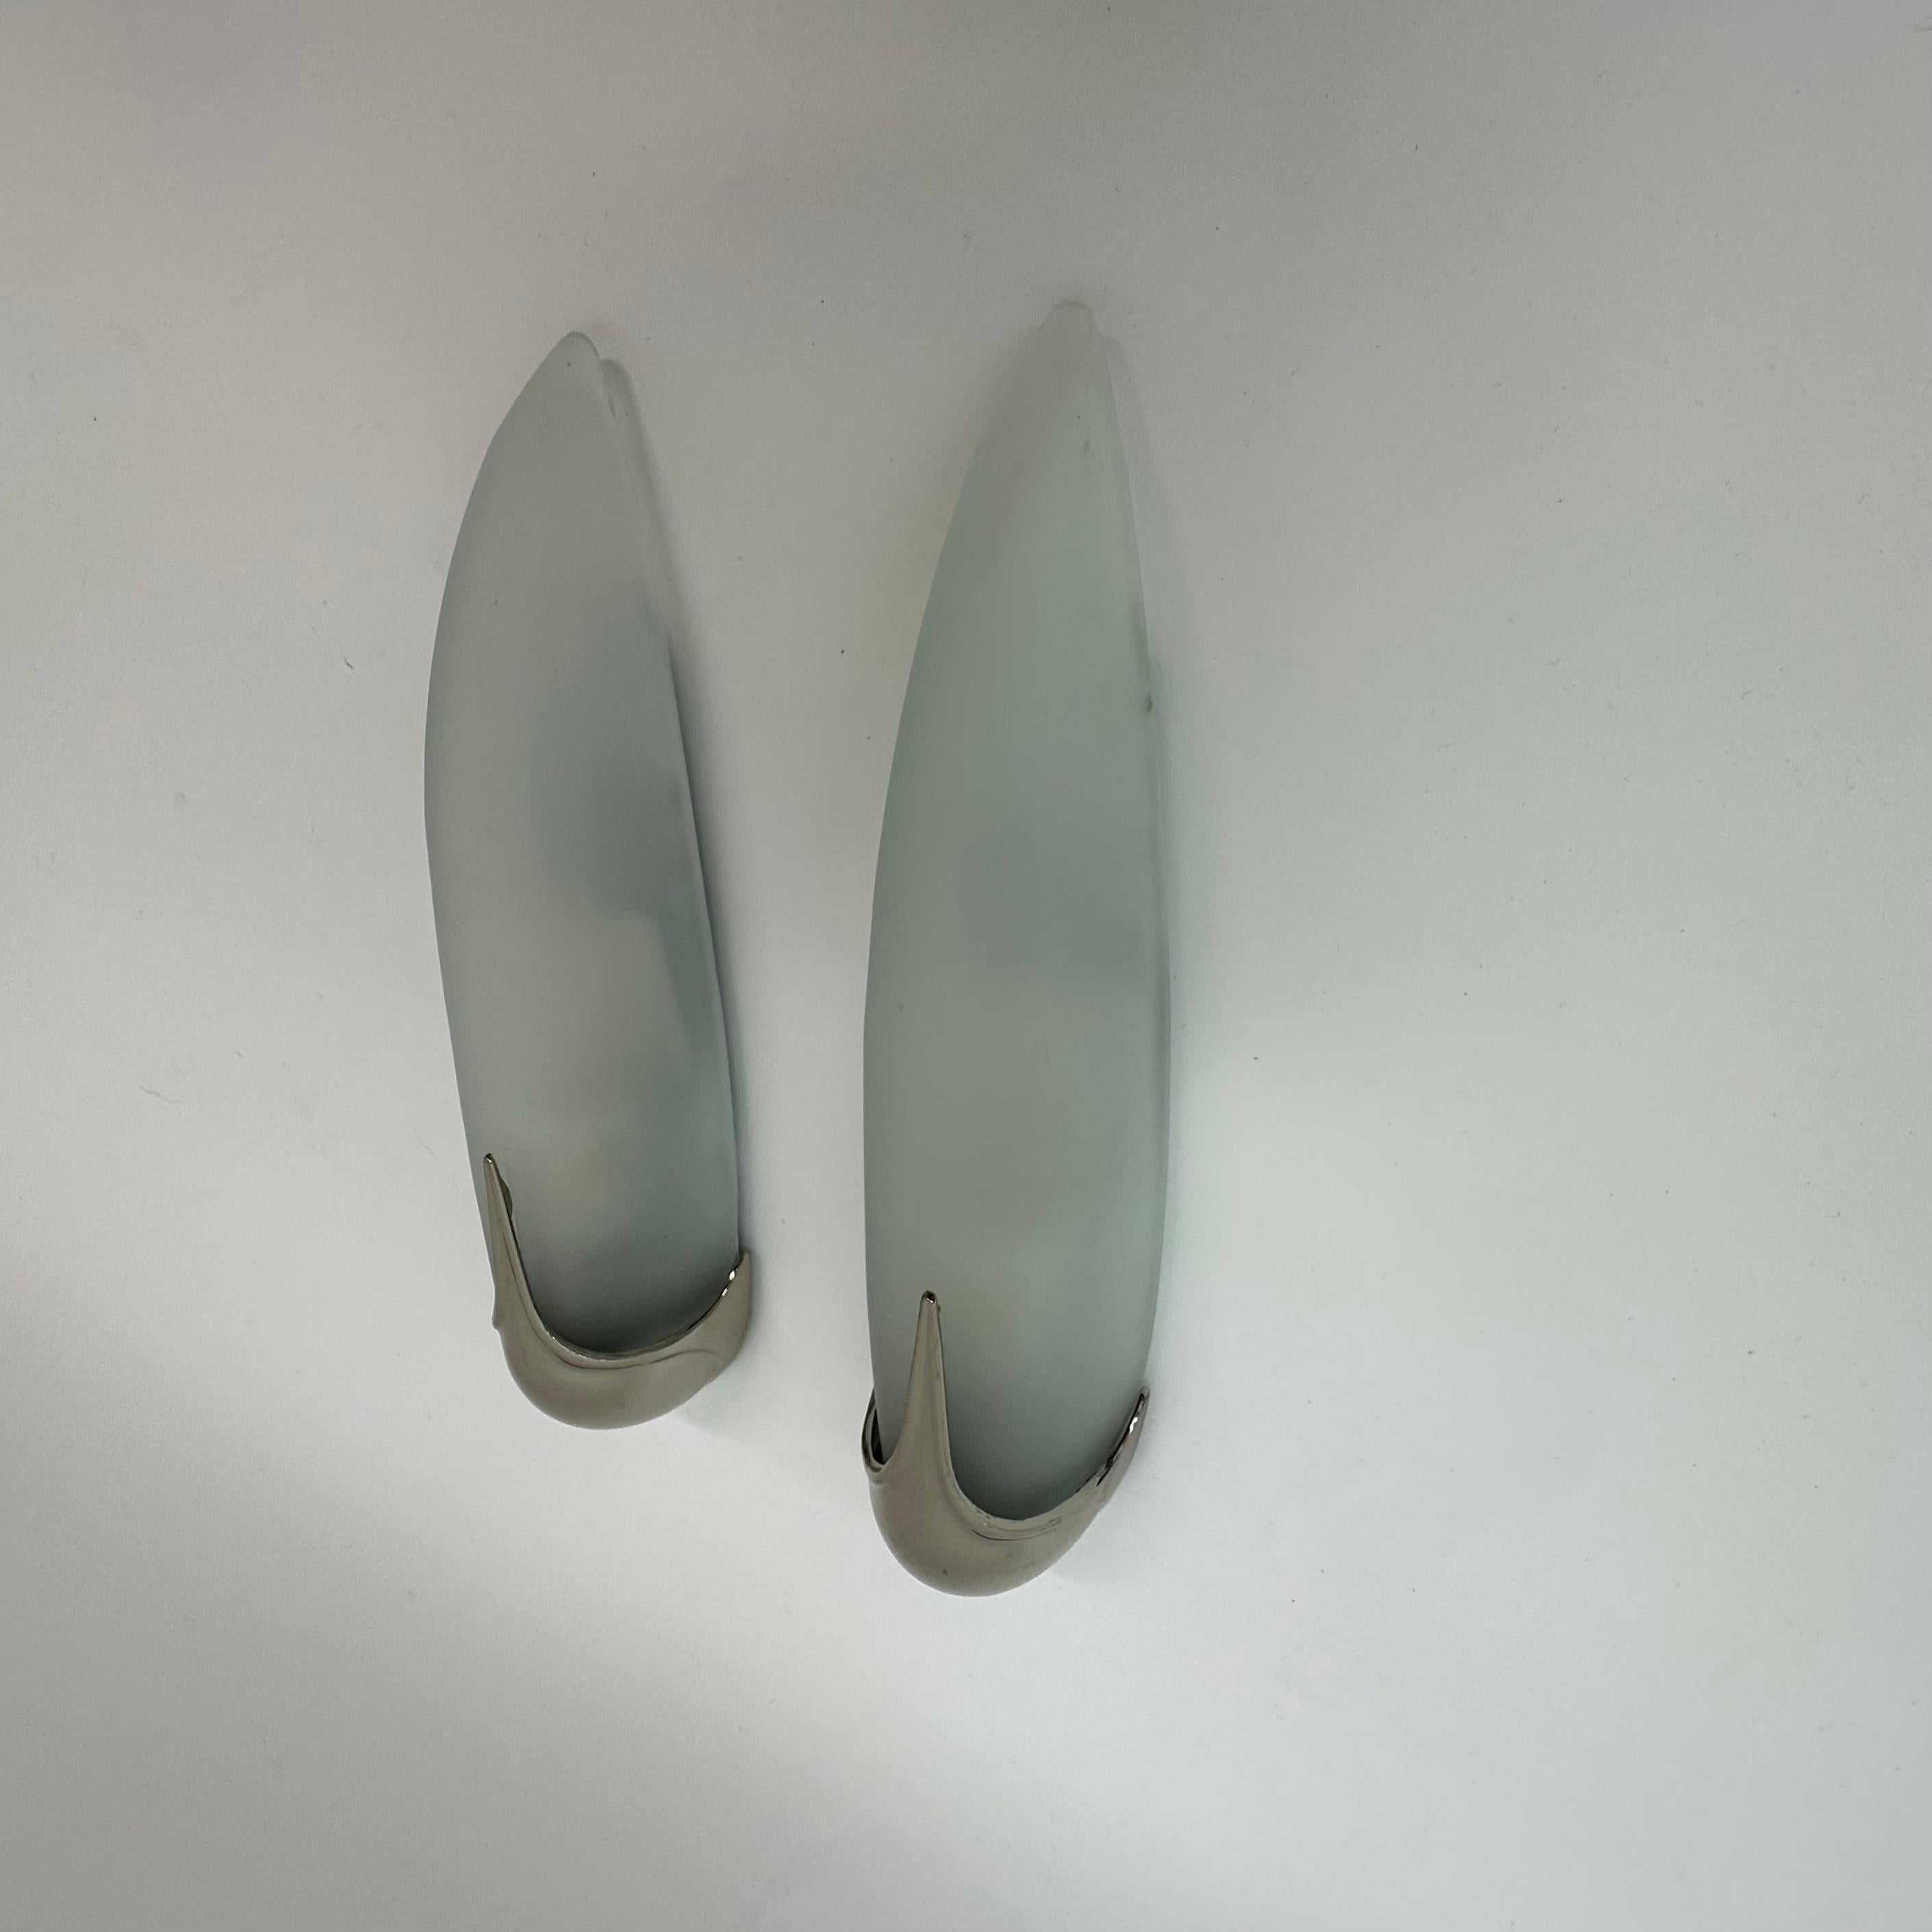 Pair of Idearte Sconces Wall Lamps, Spain, 1980s For Sale 15